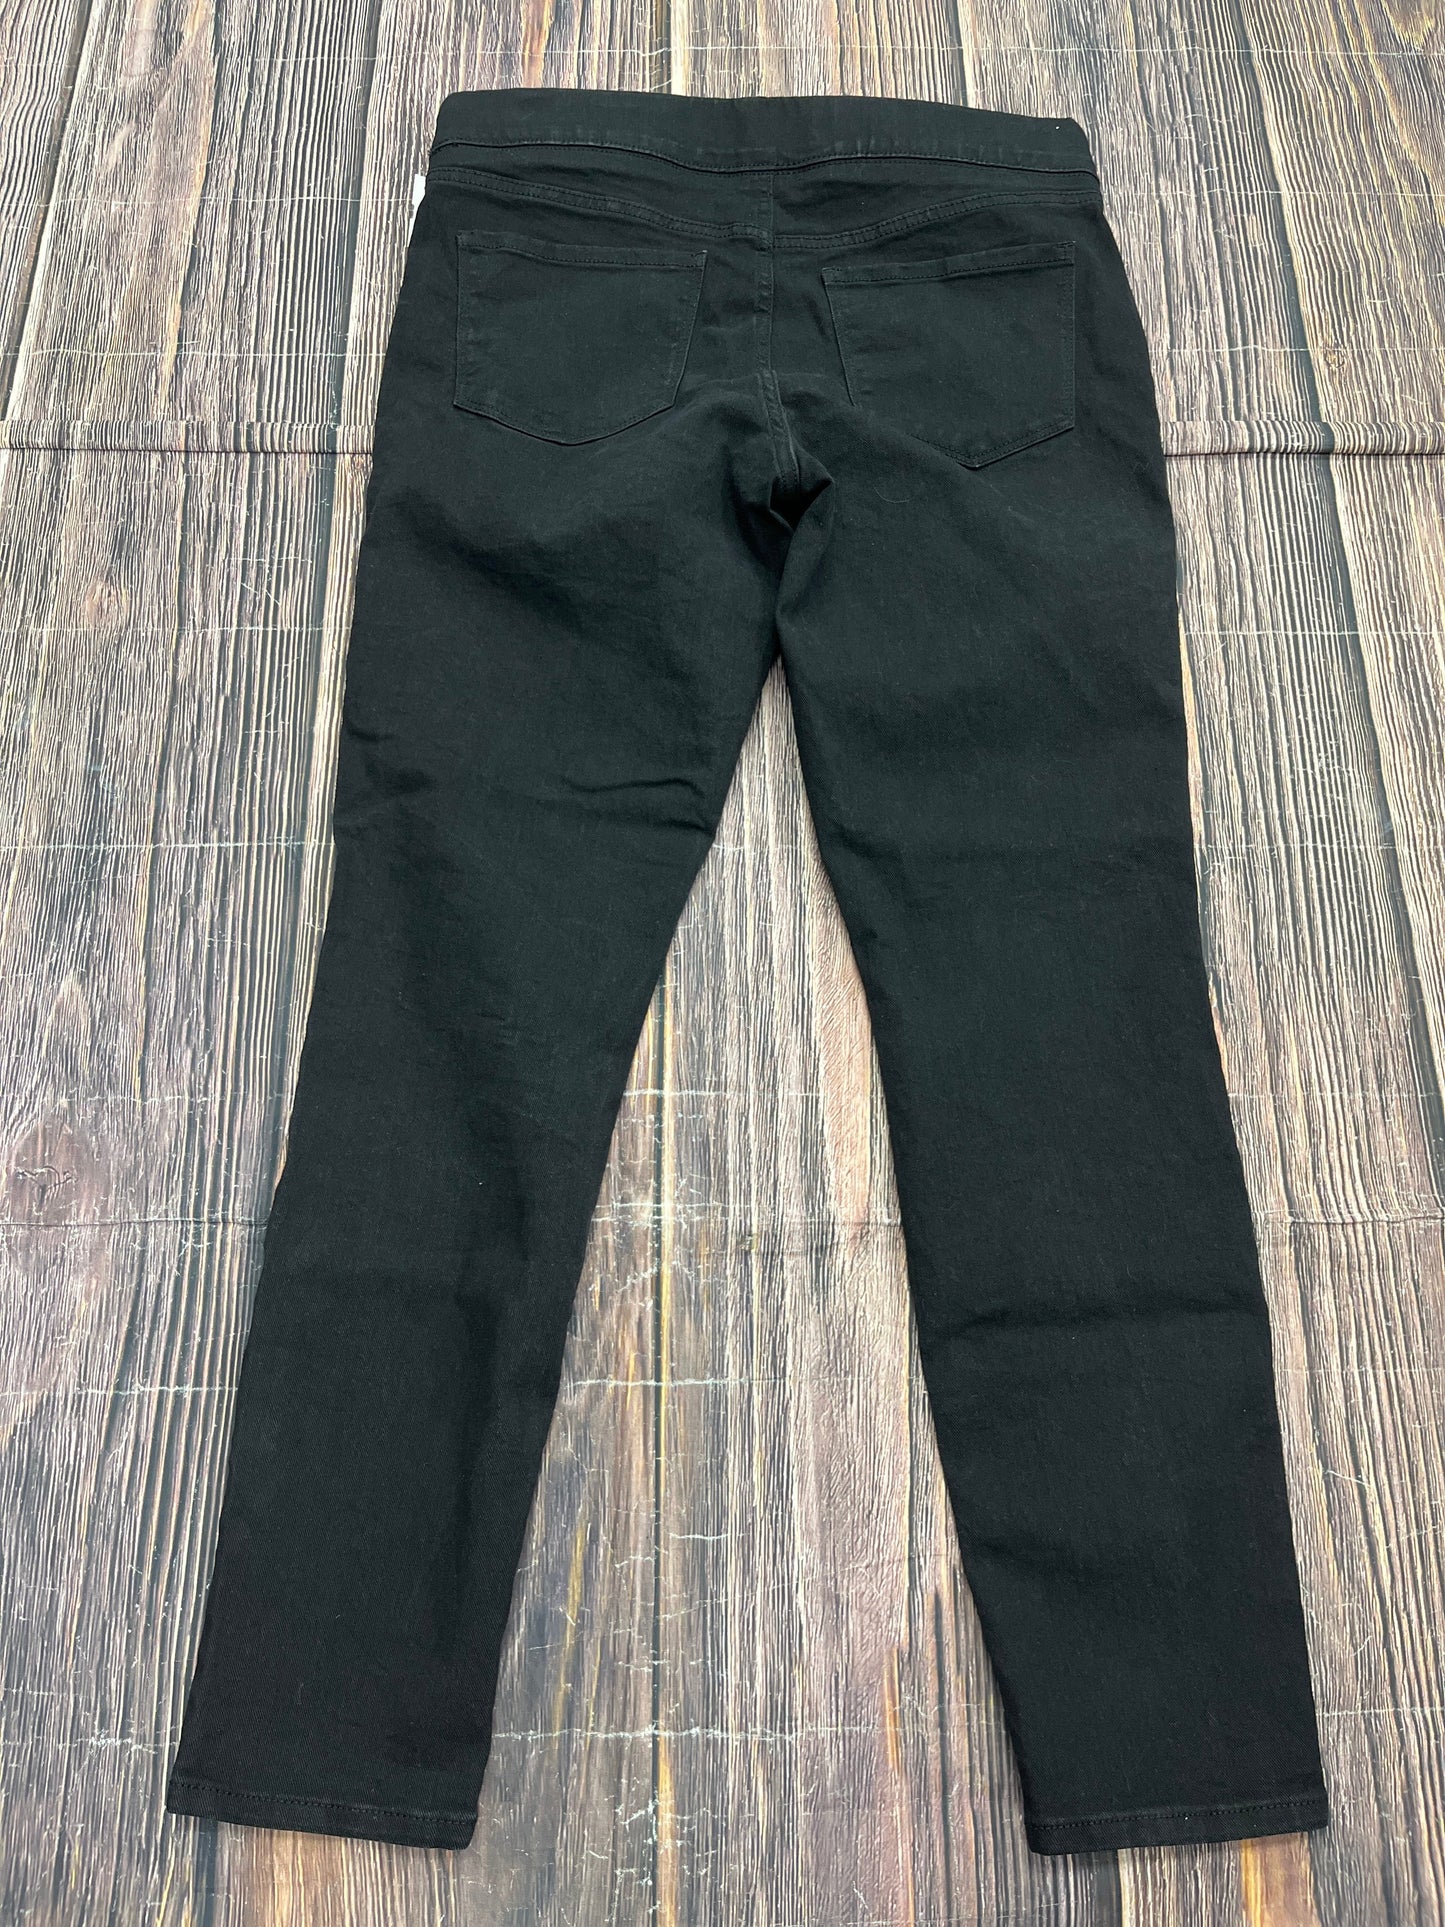 Jeans Skinny By Old Navy  Size: 12